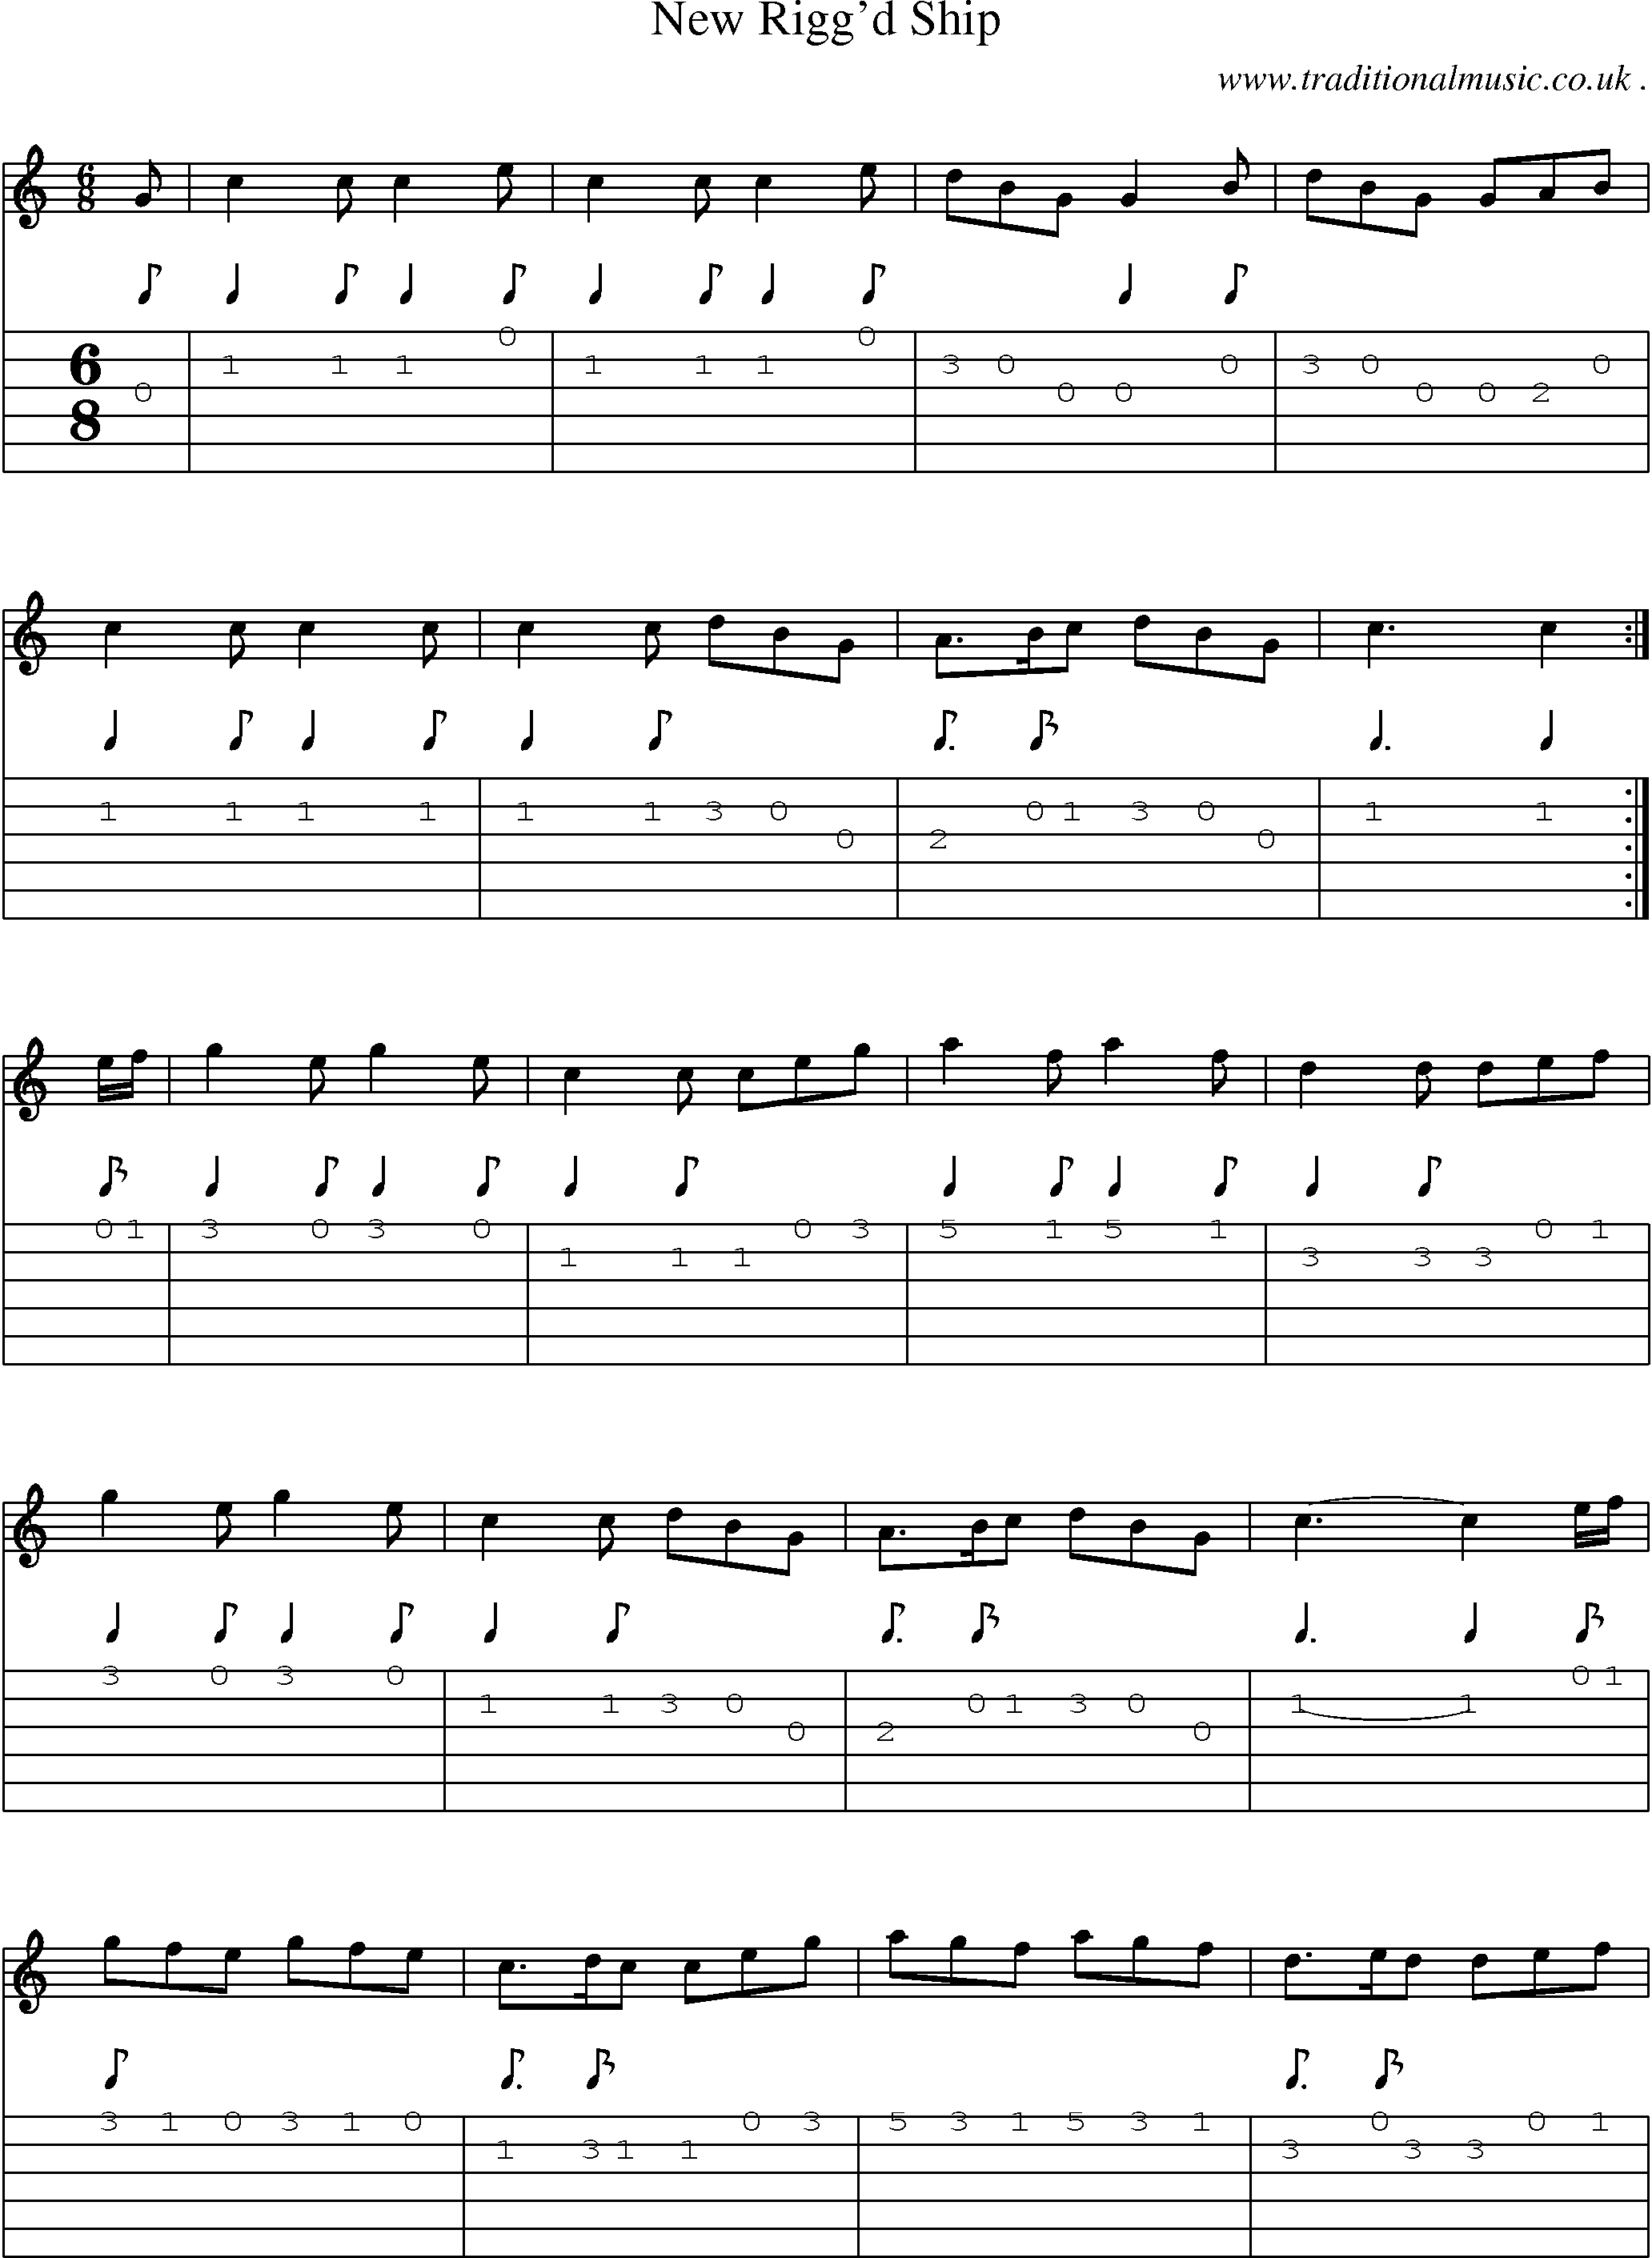 Sheet-Music and Guitar Tabs for New Riggd Ship